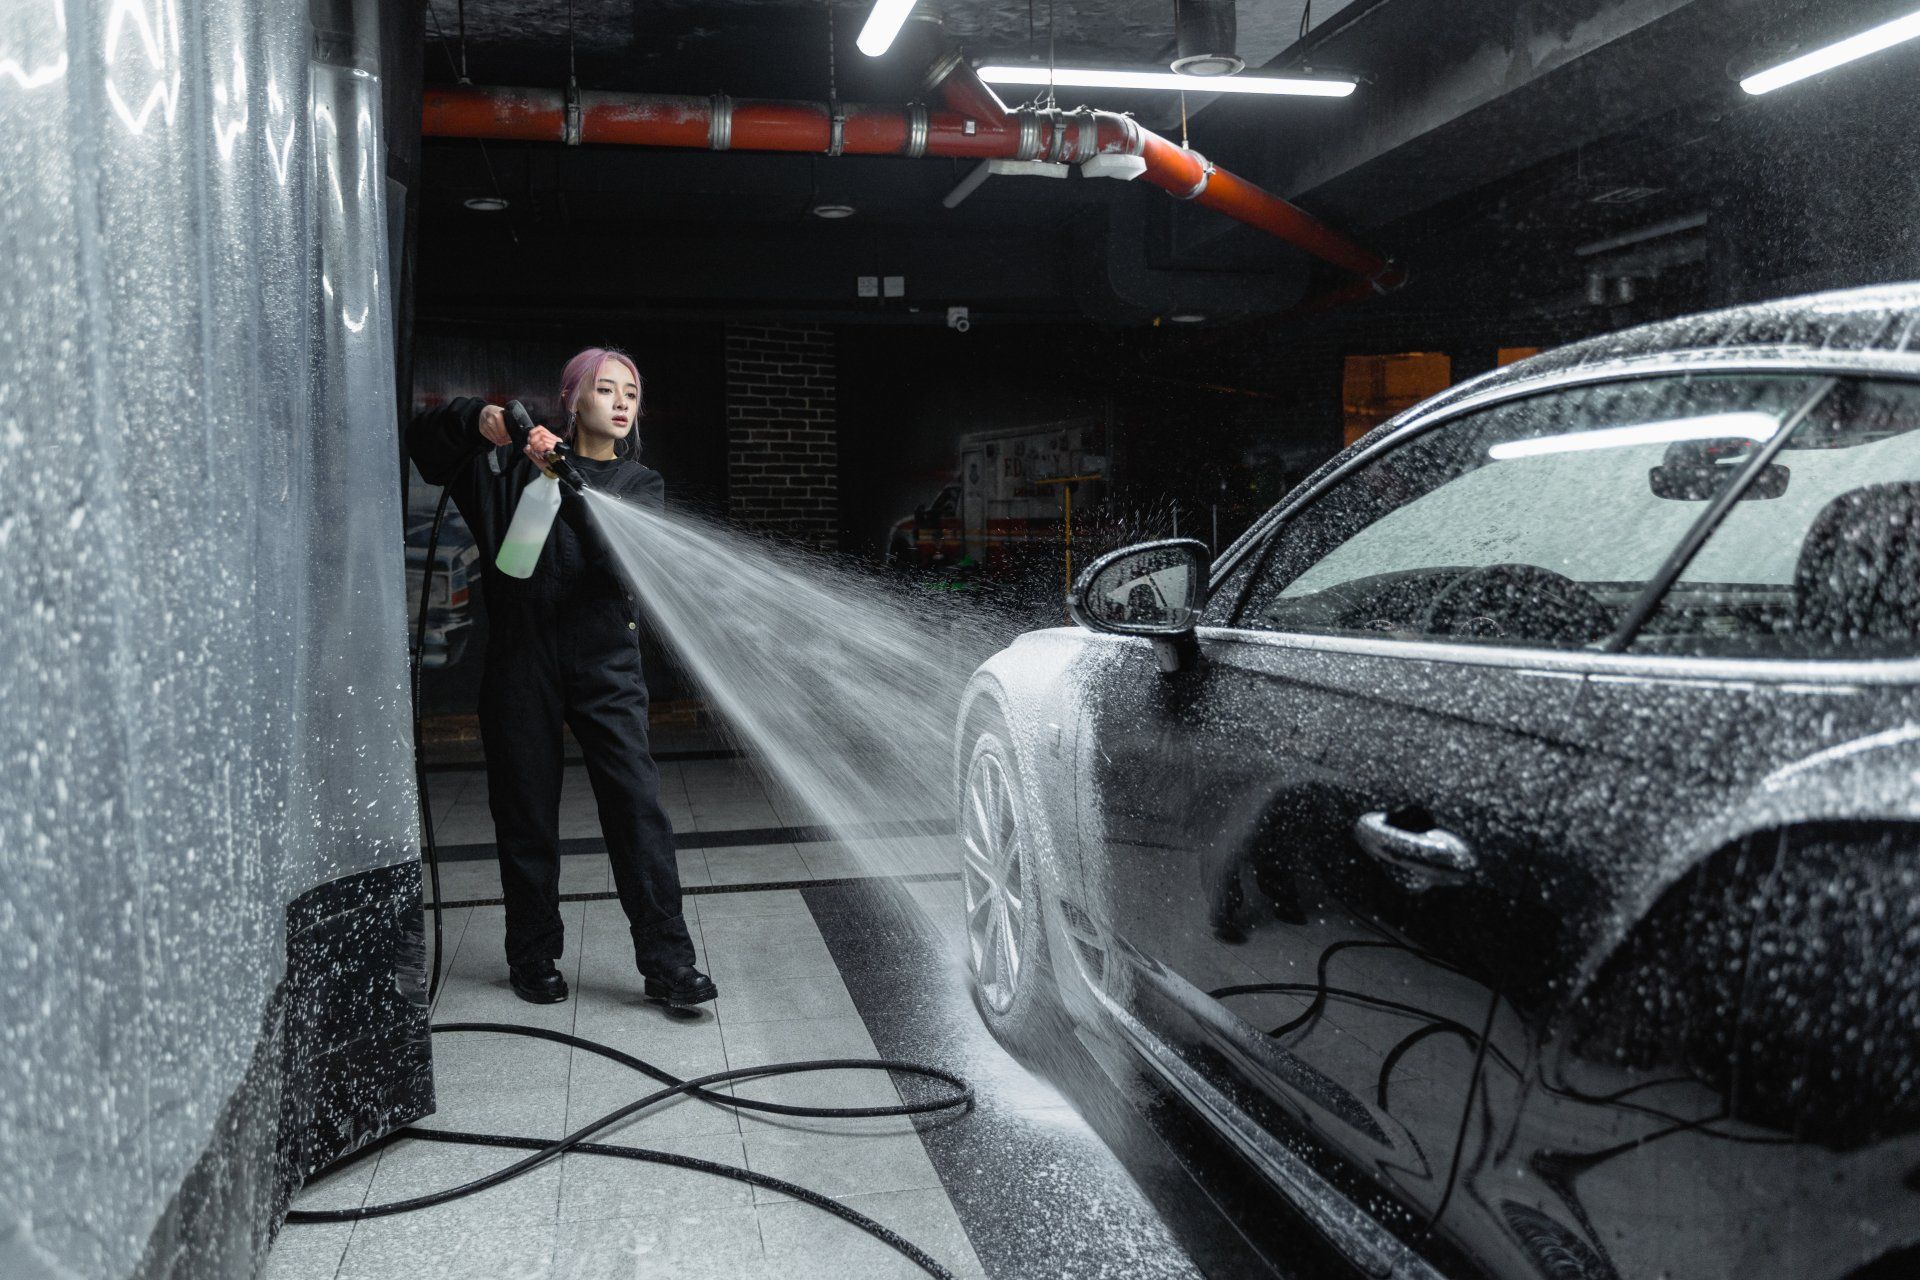 a person washing a vehicle